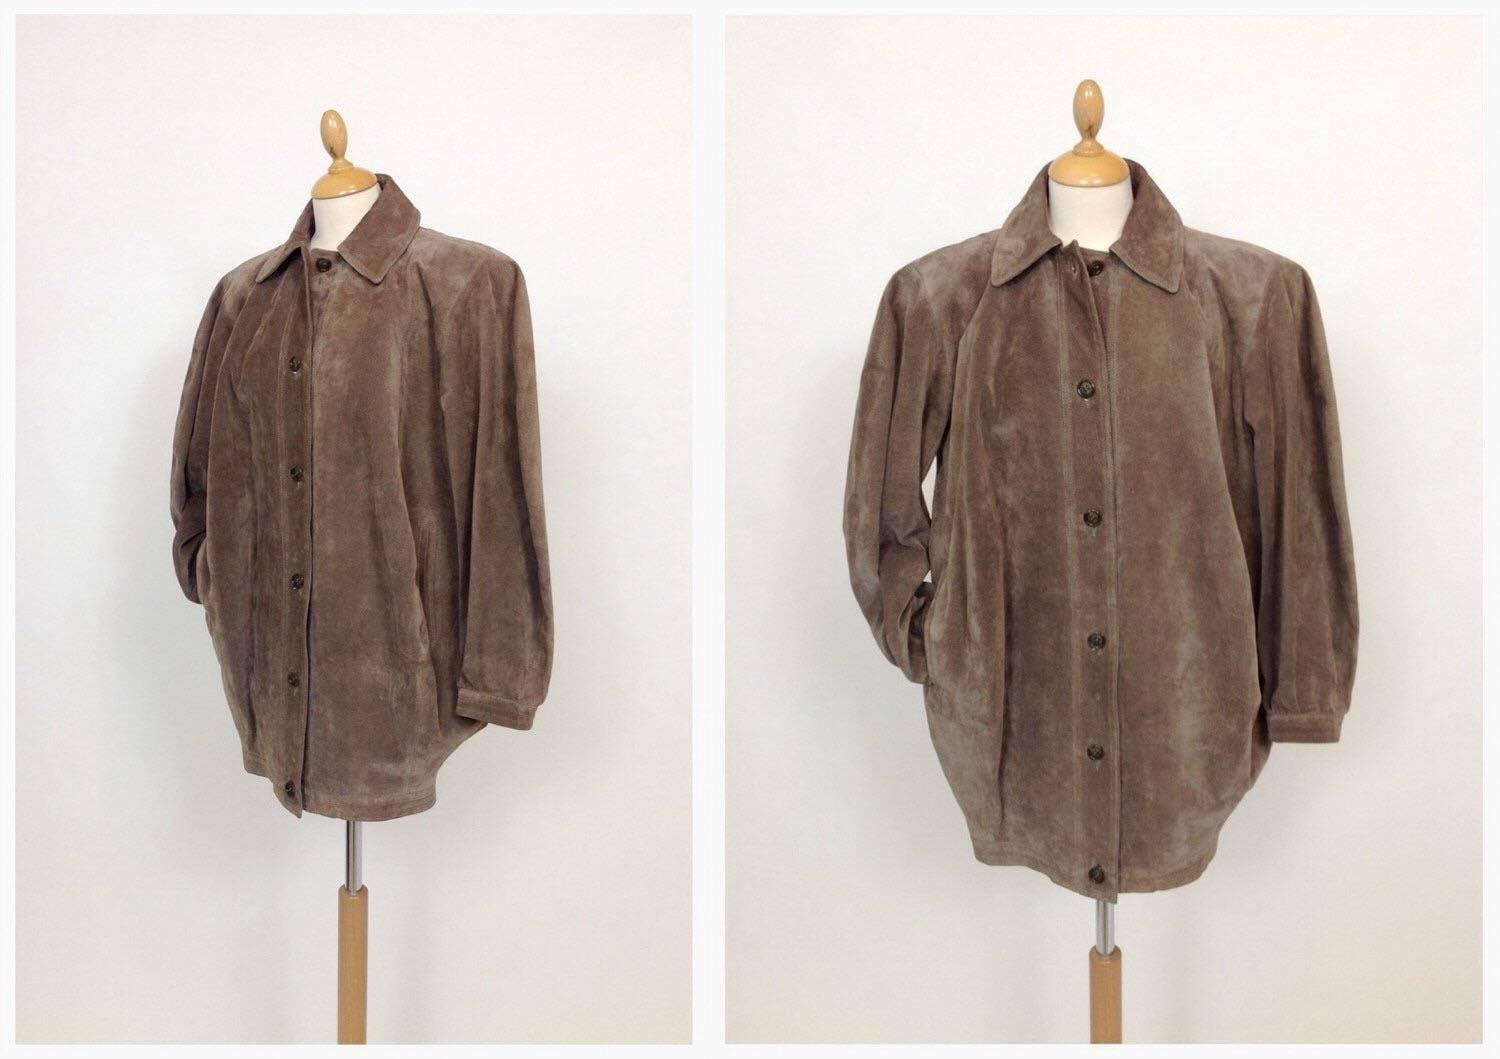 This lovely 1980s Saint Laurent jacket is in a brown suede pig skin leather. It has balloon line, padded straps, side pockets and it's all lined in satin. 

Very Good vintage condition

Label: Saint Laurent Rive Gauche 
Fabric: leather
Color: